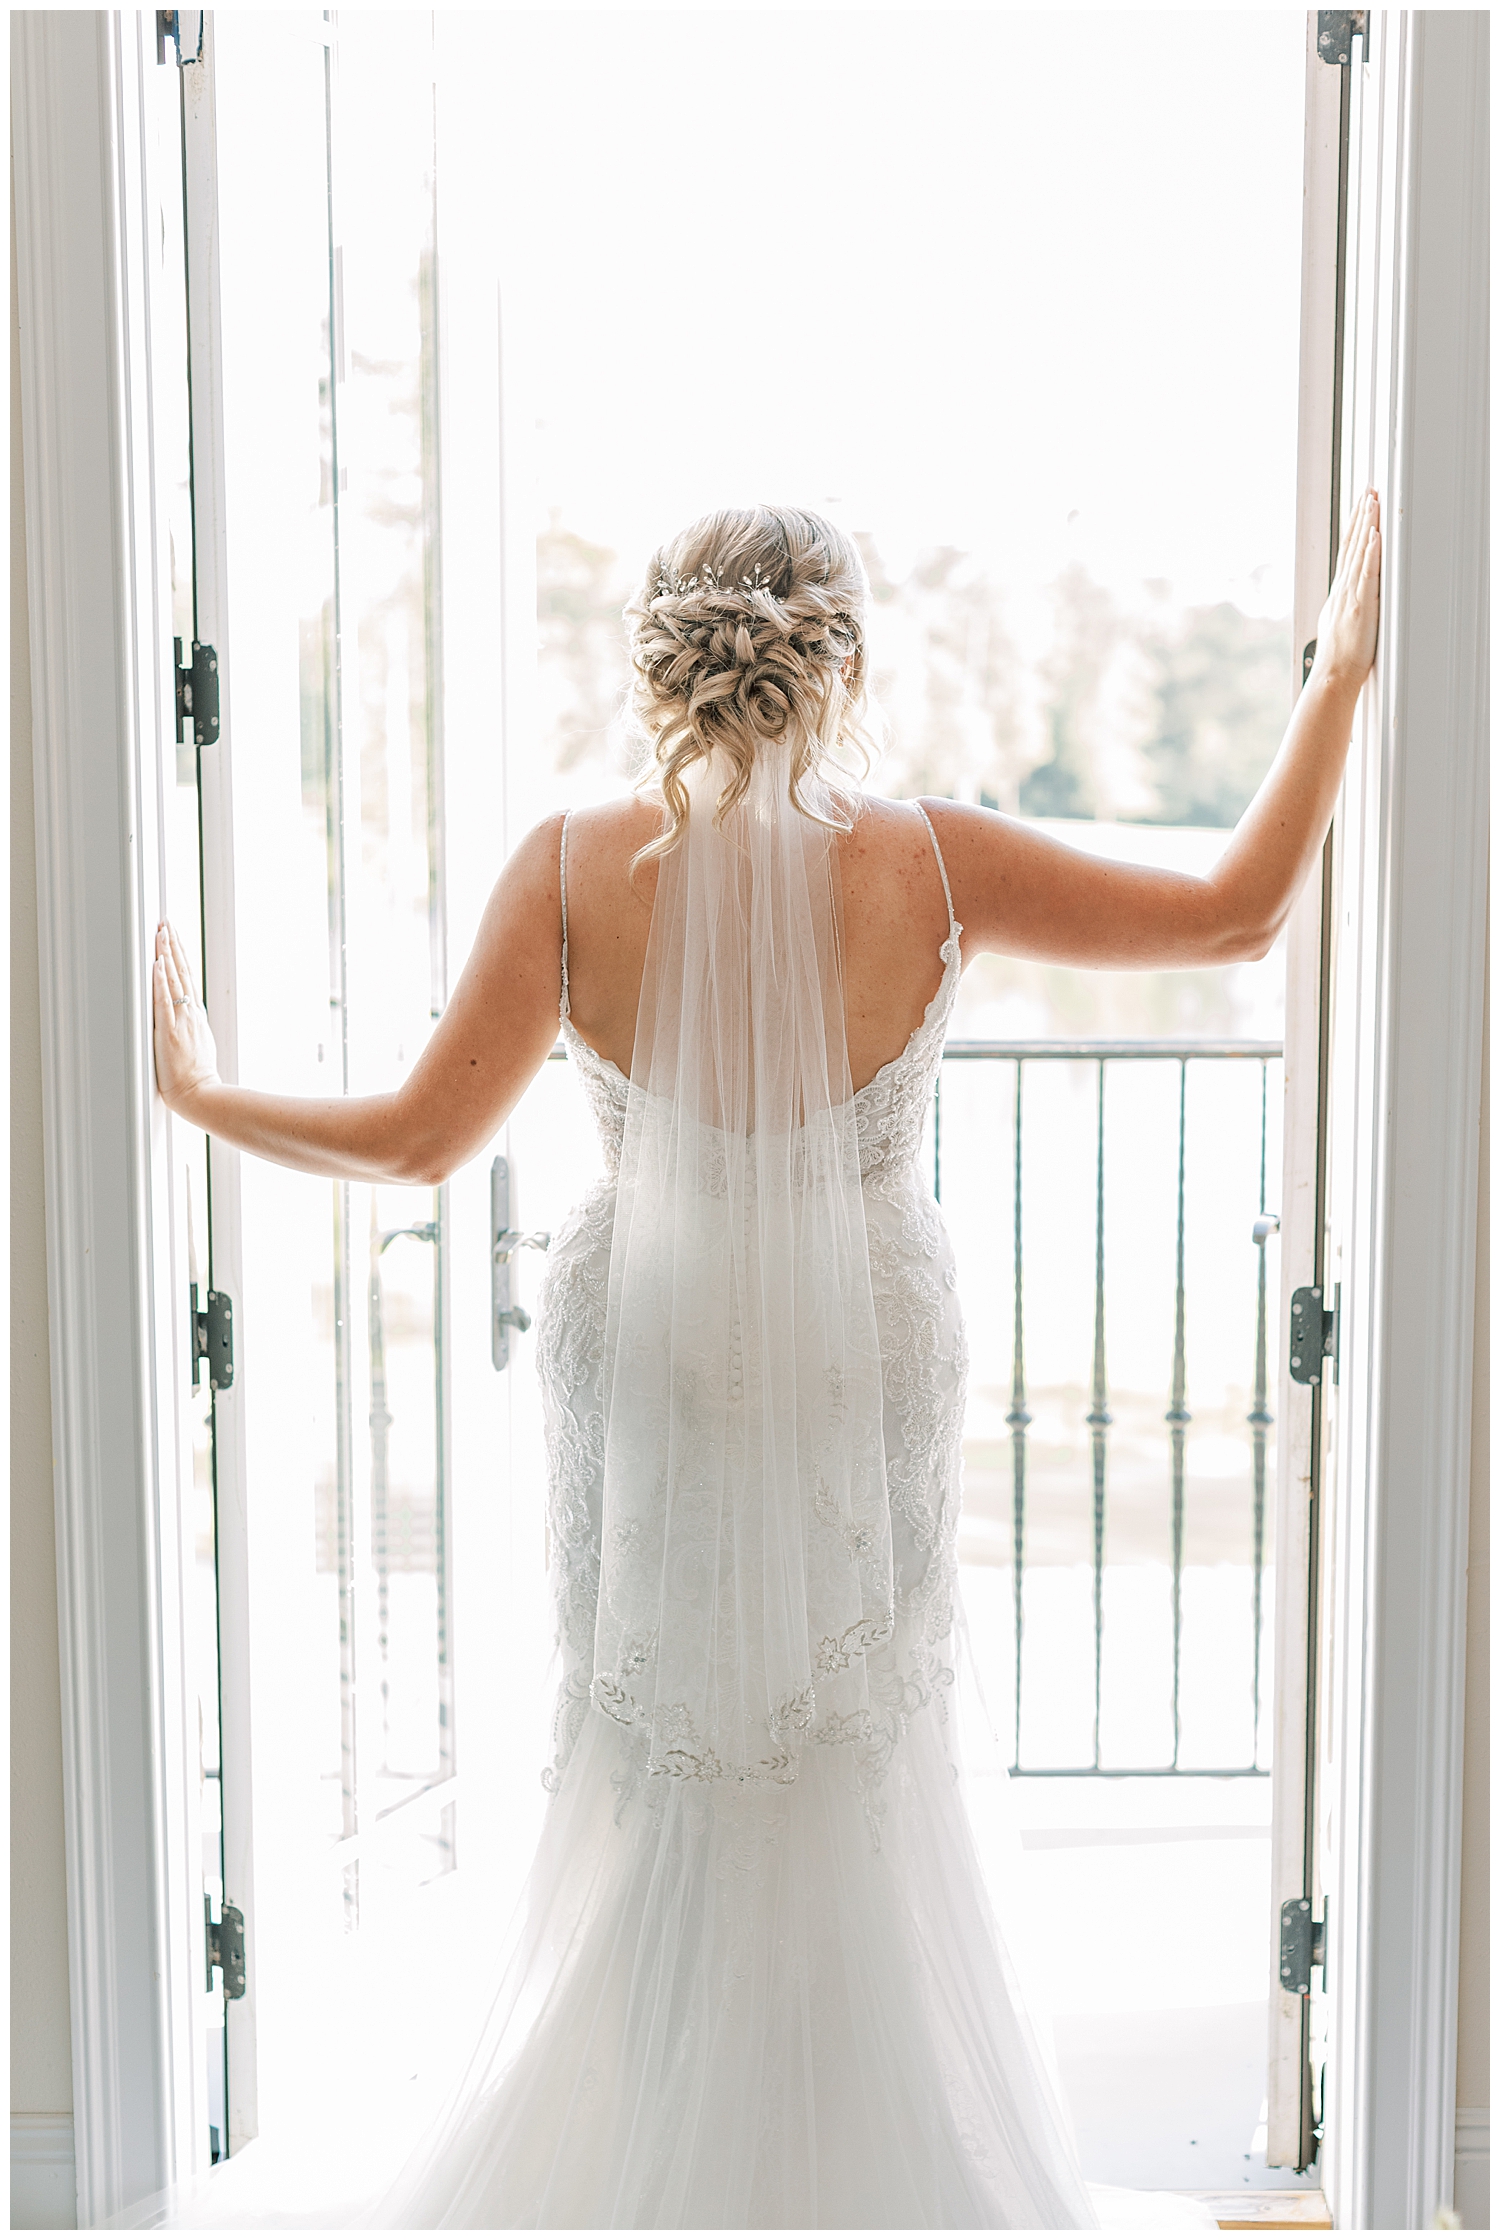 A bride opens the doors at Three Lakes Manor.